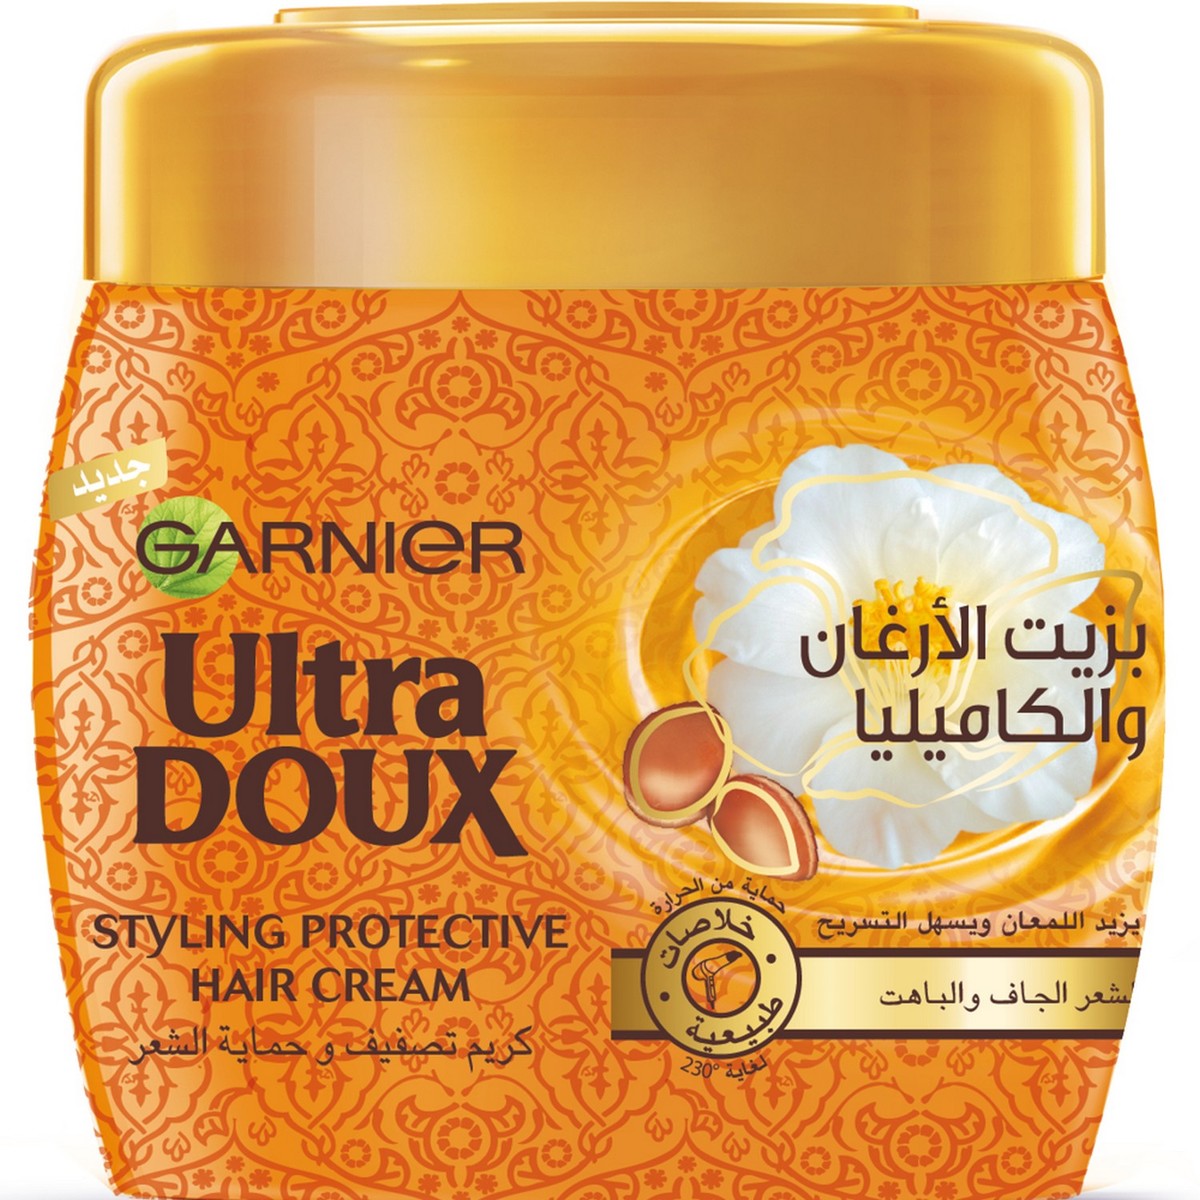 Garnier Ultra Doux The Marvelous Styling Protective Hair Cream With Argan And Camelia Oils 200 ml